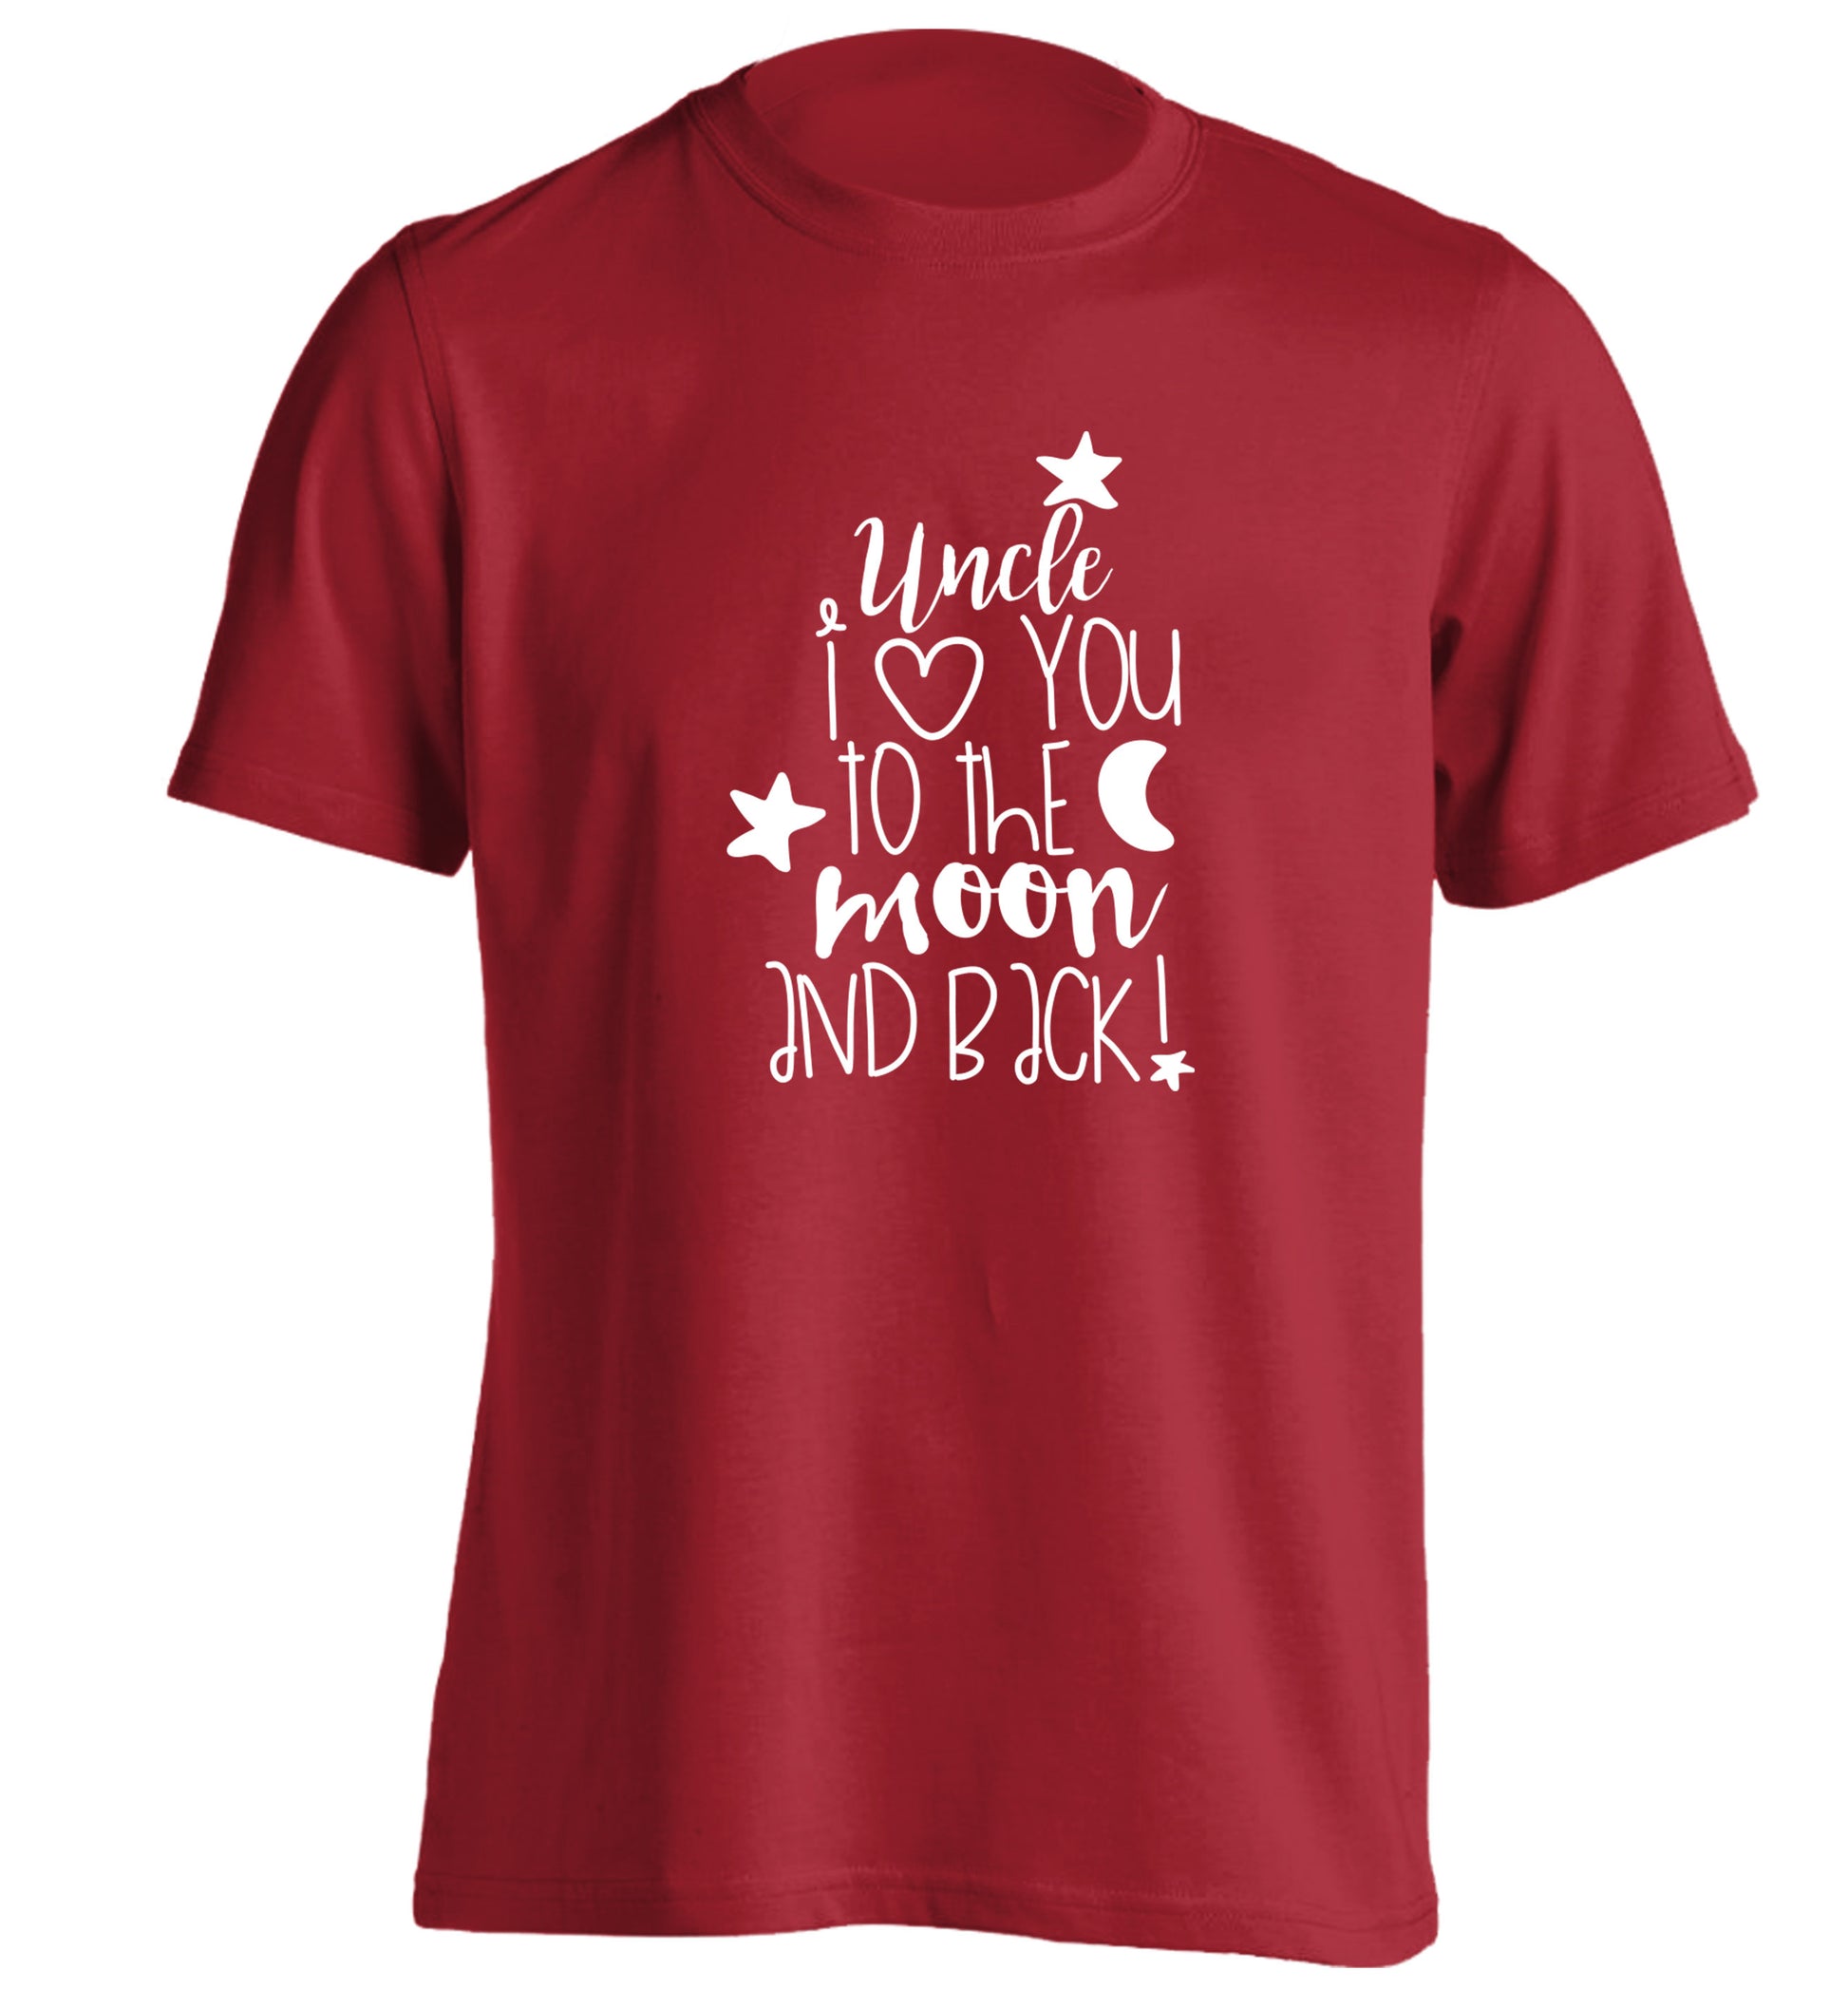 Uncle I love you to the moon and back adults unisex red Tshirt 2XL